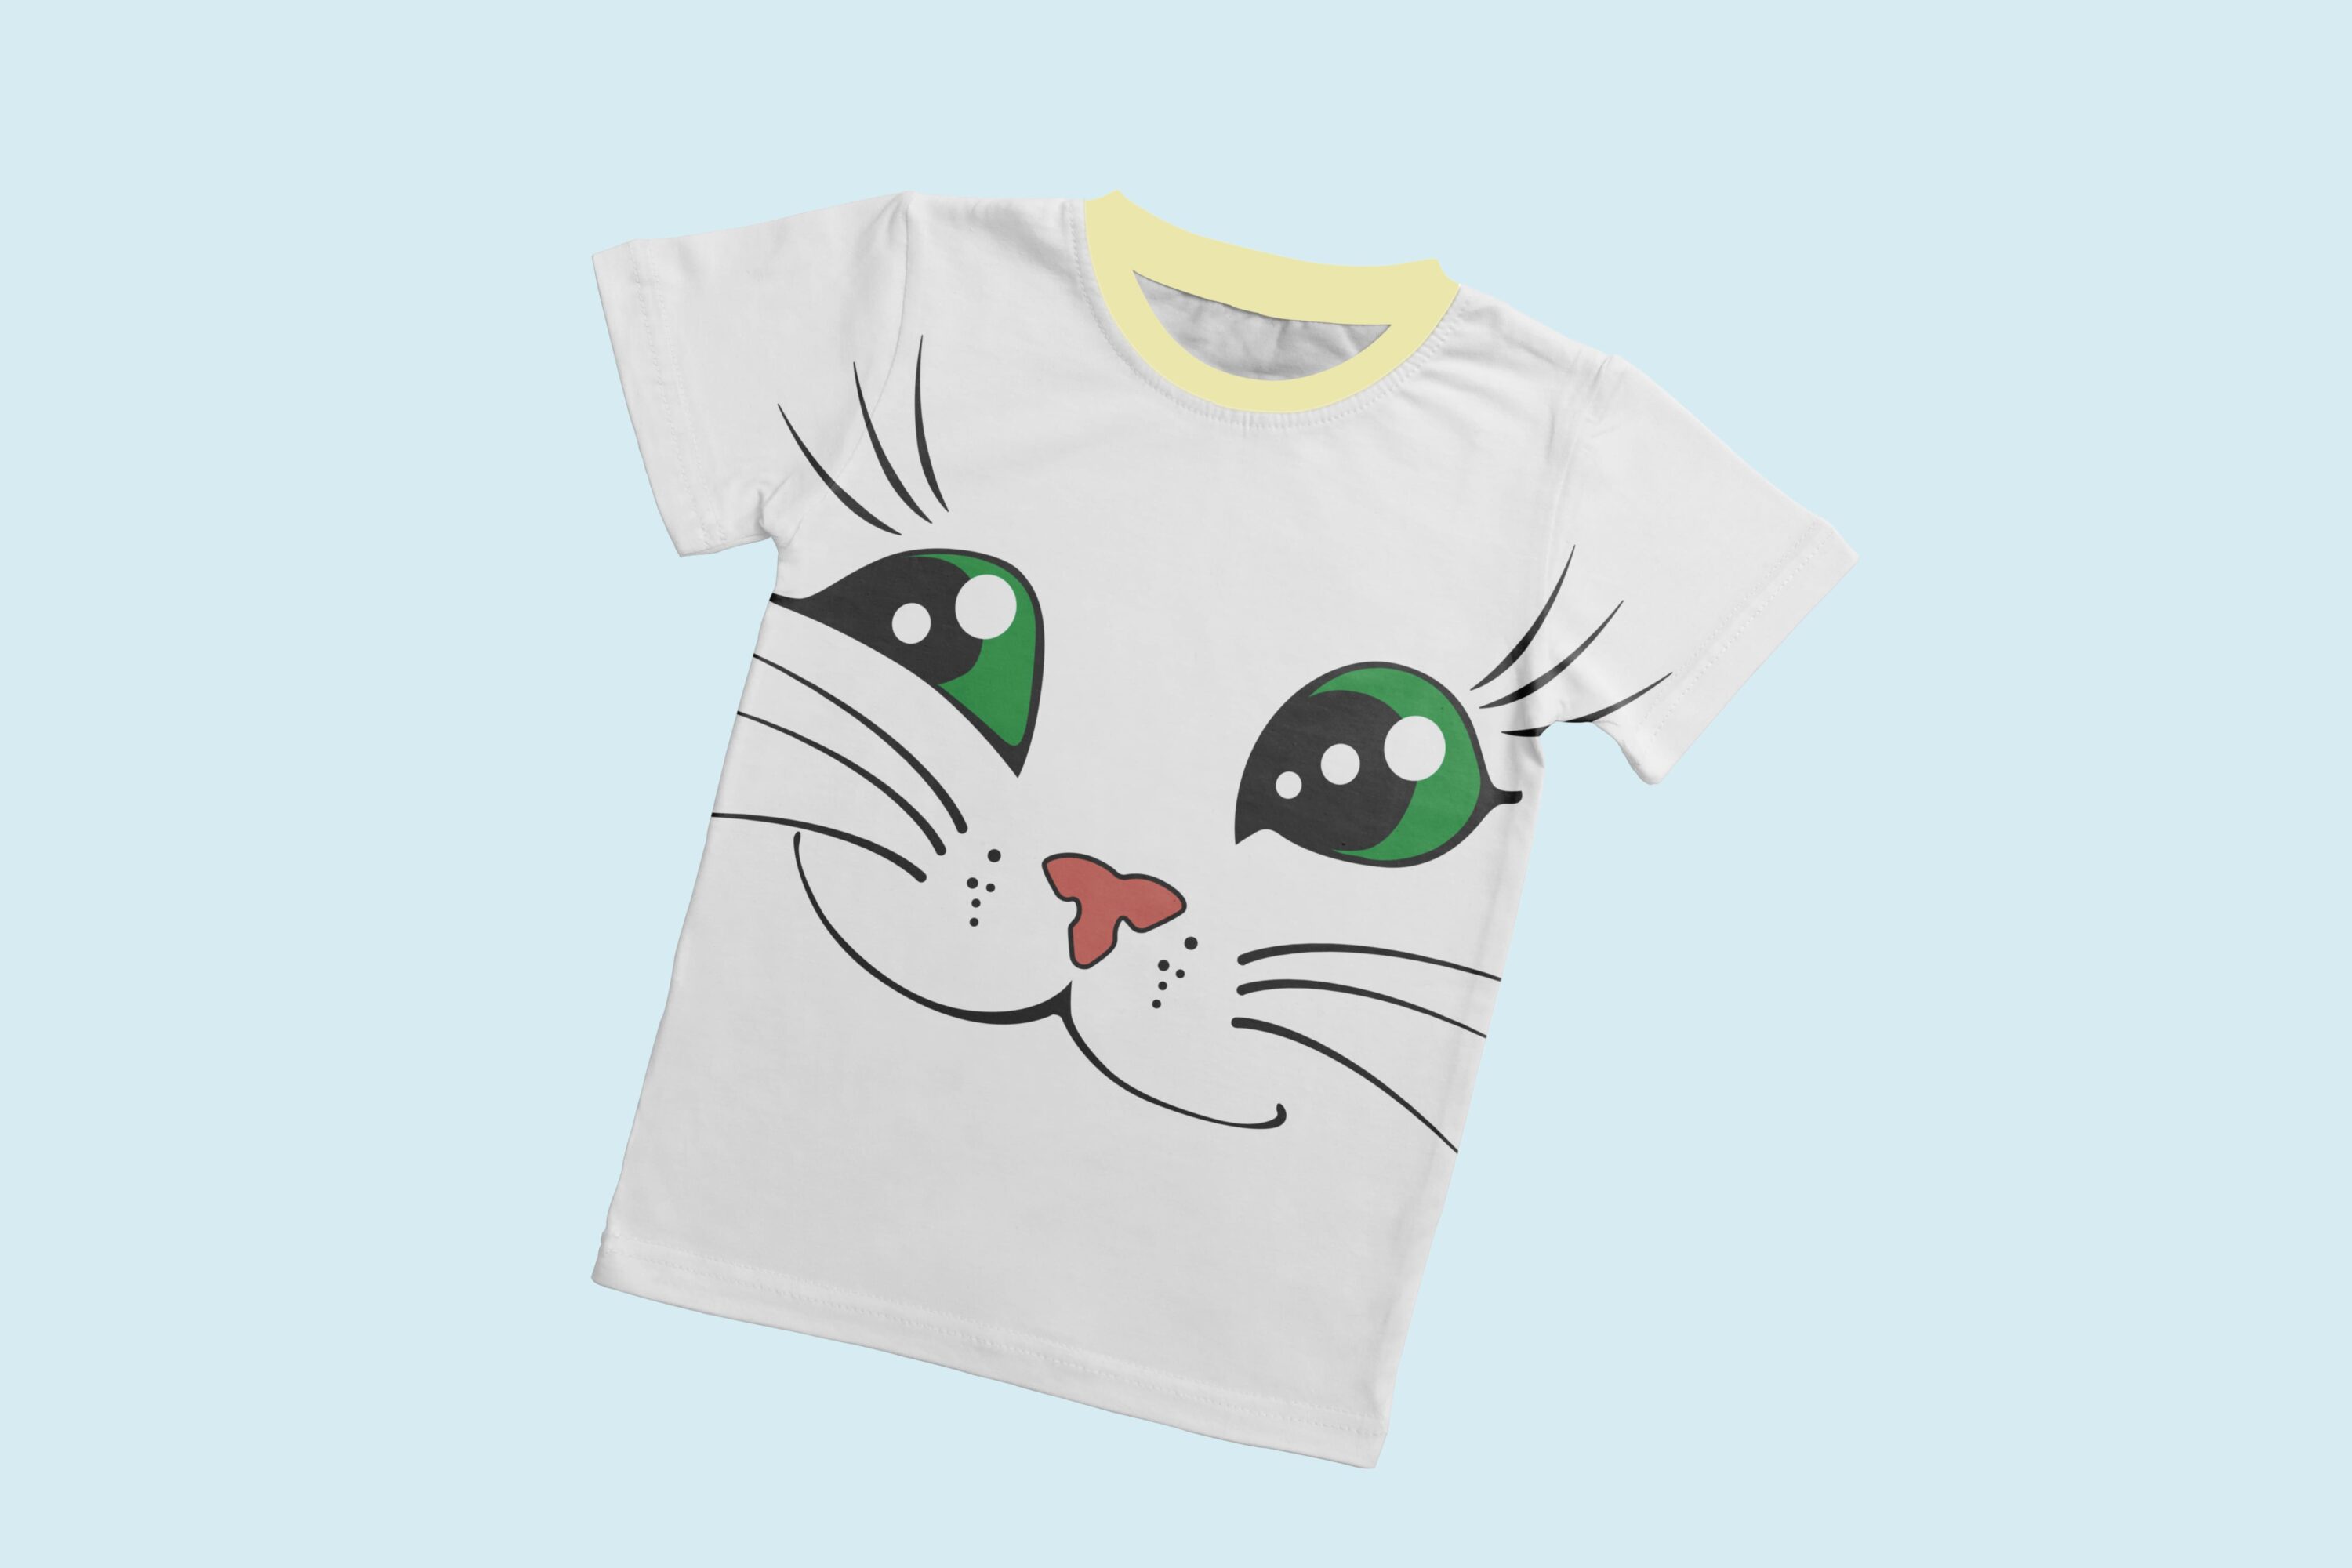 A white t-shirt with a light yellow collar and the face of a smiling cat with green eyes.